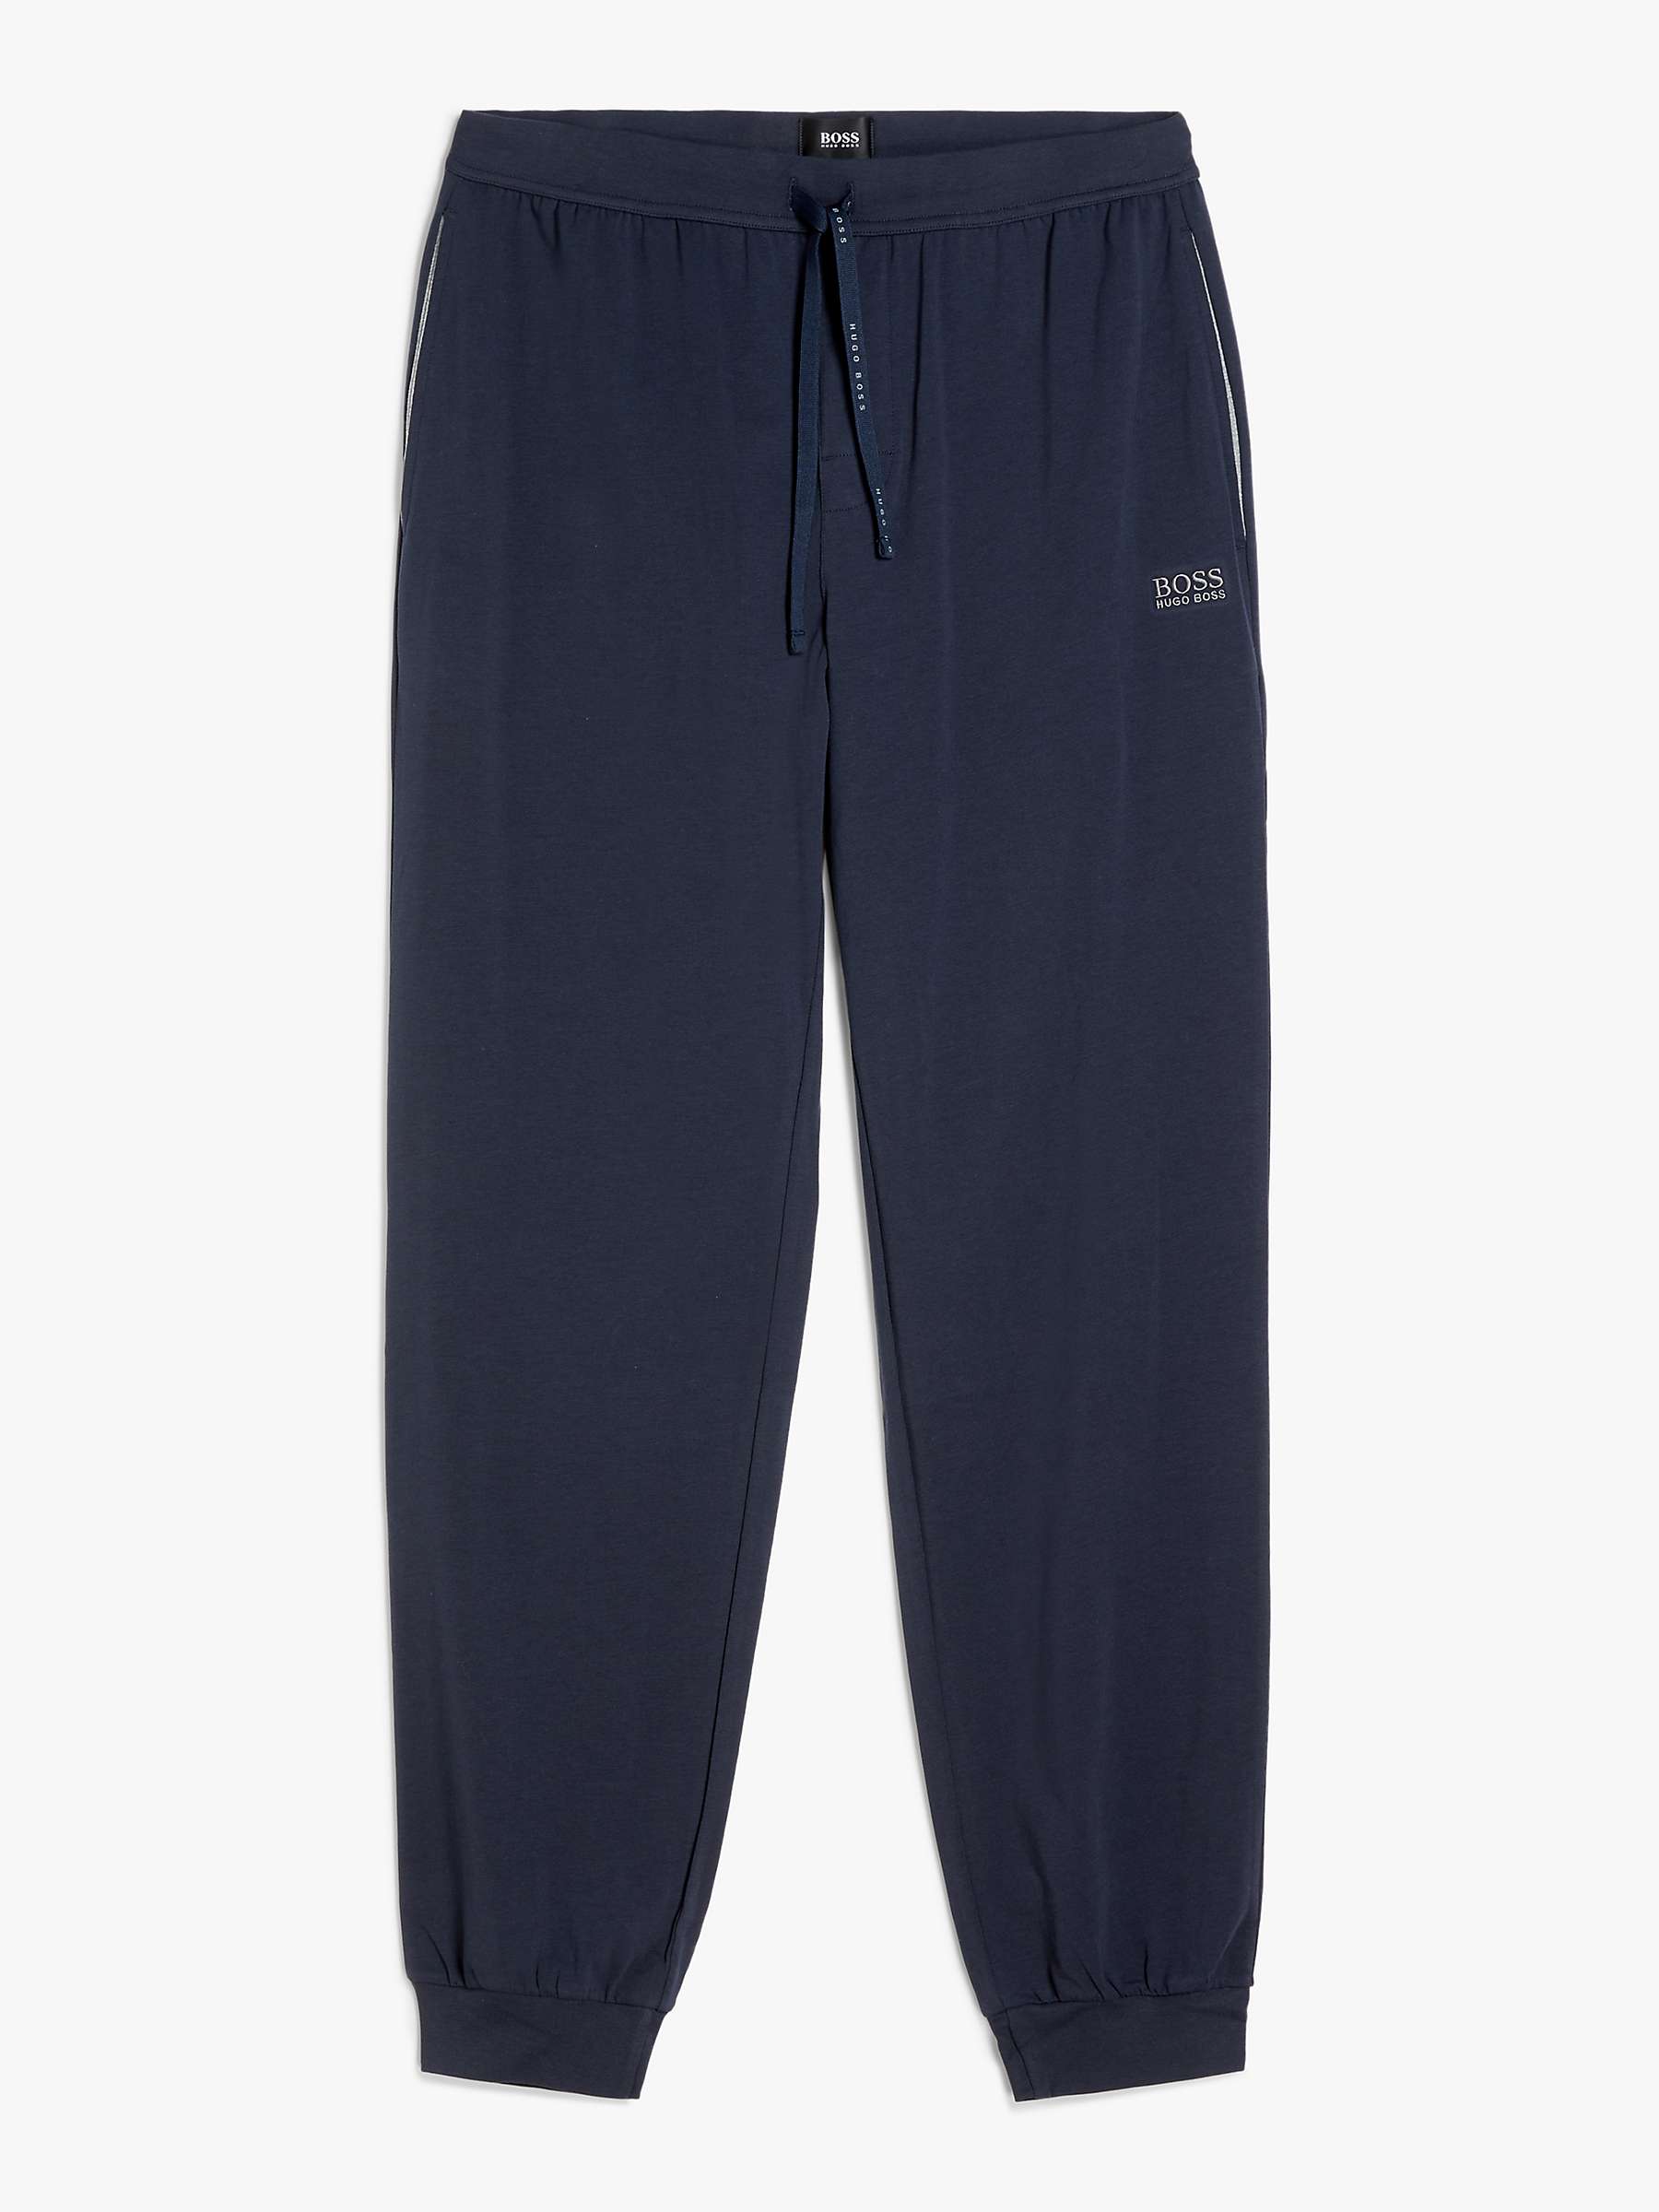 Buy BOSS Stretch Cotton Loungewear Joggers, Navy Online at johnlewis.com